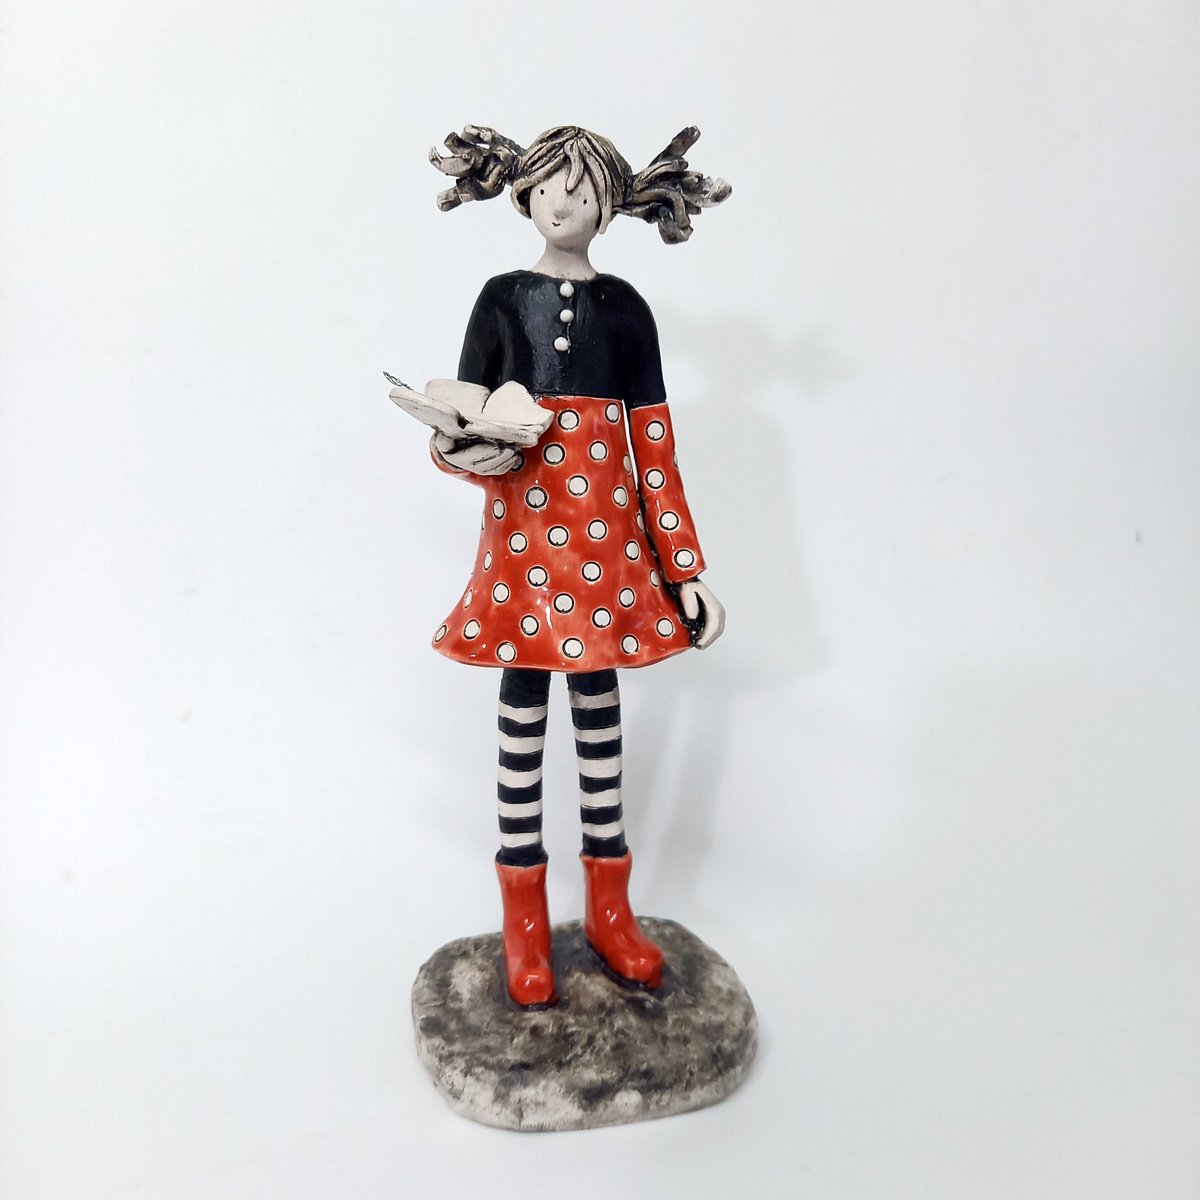 The Girl with the Butterfly. Ceramic sculpture by Izabell Nemechek